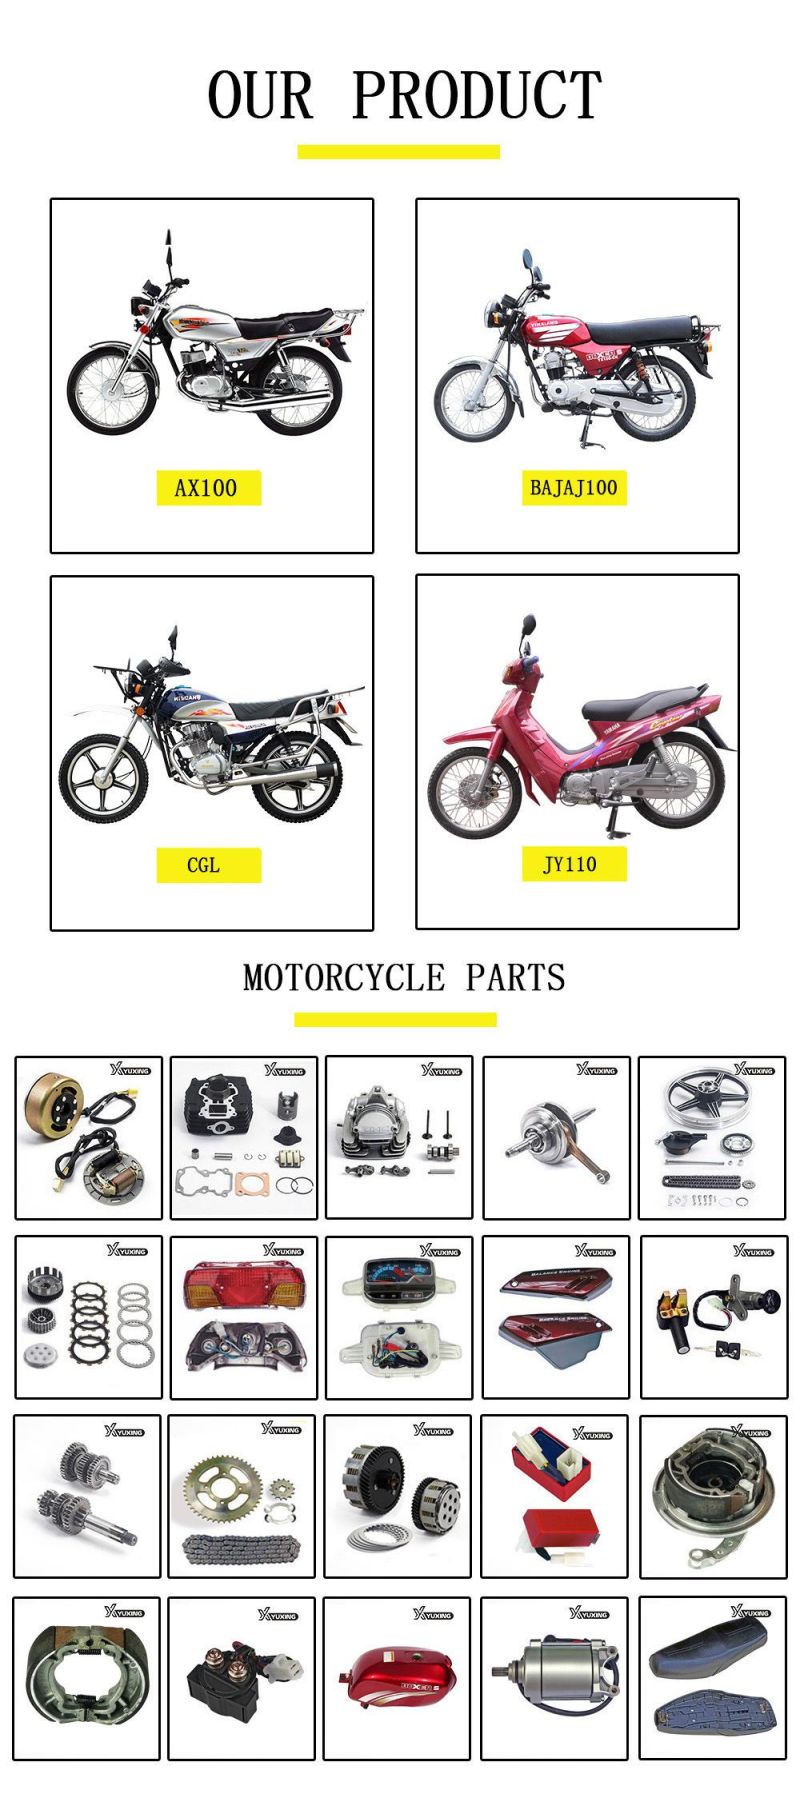 High Quality Mf12V7-1A Motorcycle Parts Maintenance-Free Rechargeable Motorcycle Battery